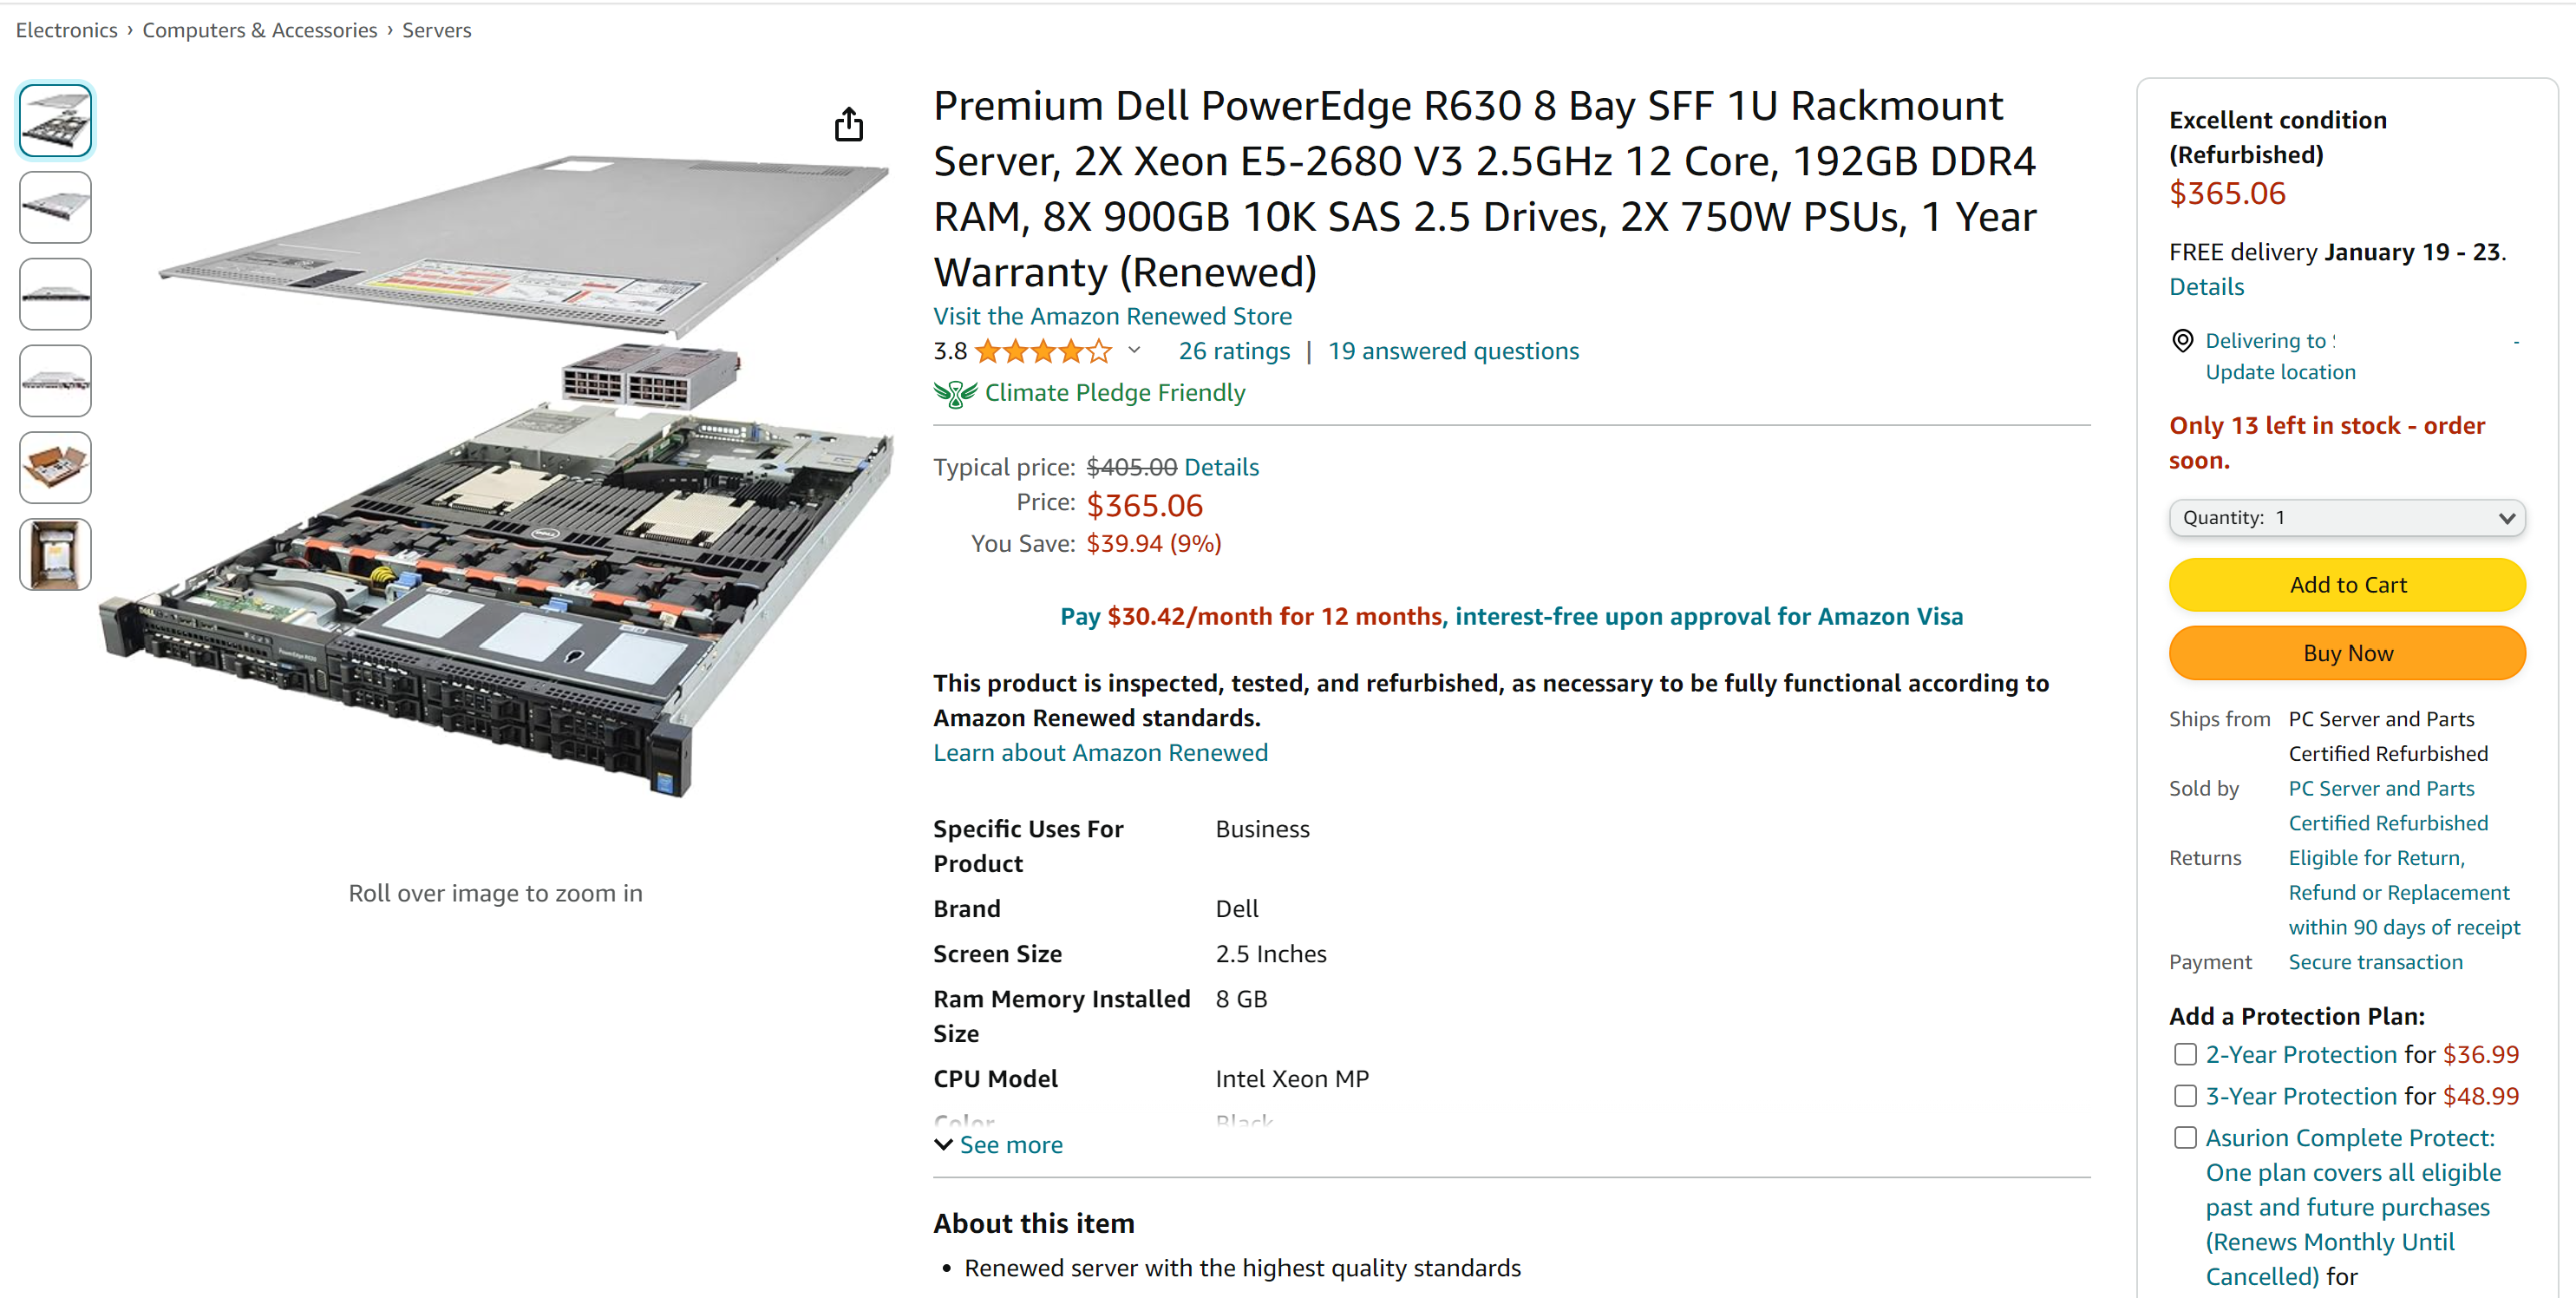 refurbished Dell PowerEdge R630 selling on Amazon